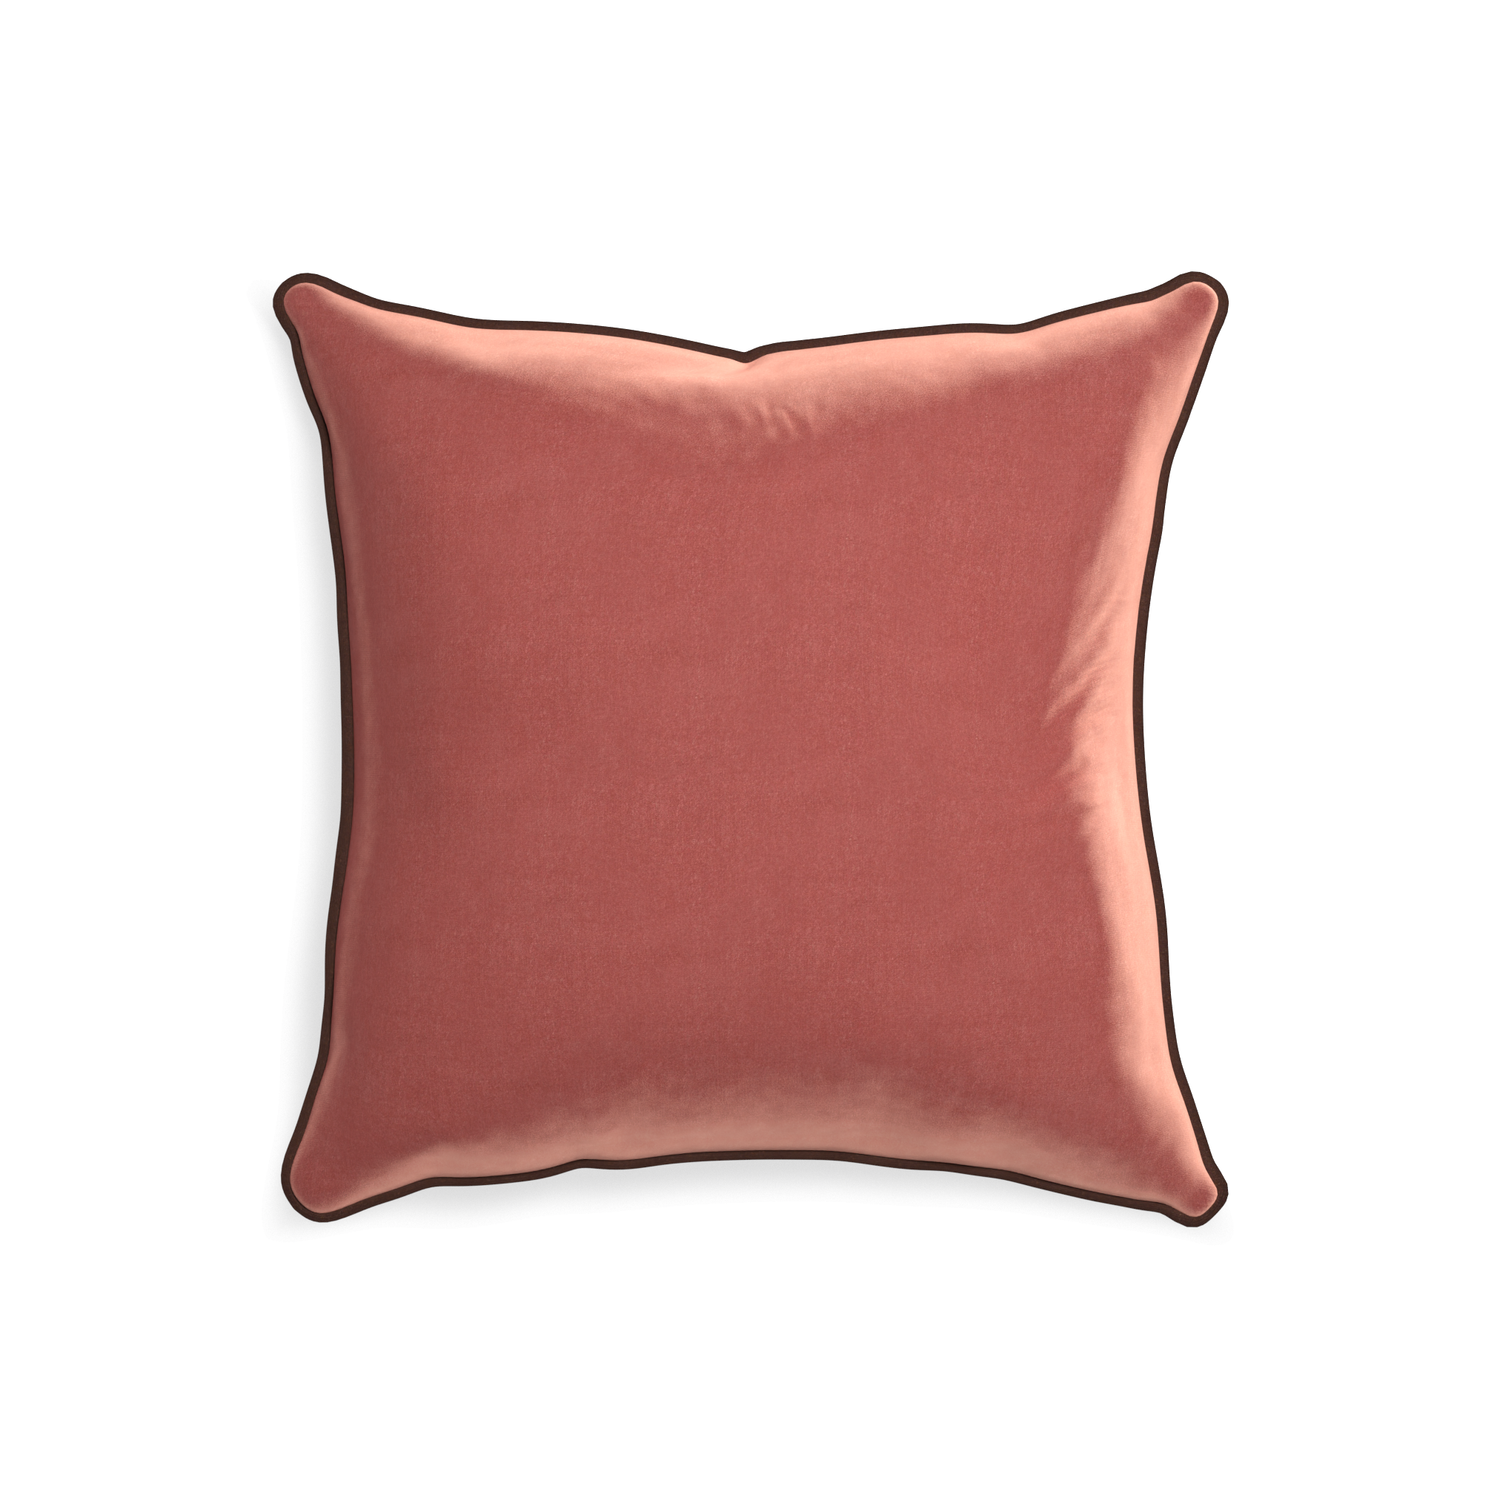 square coral velvet pillow with brown piping